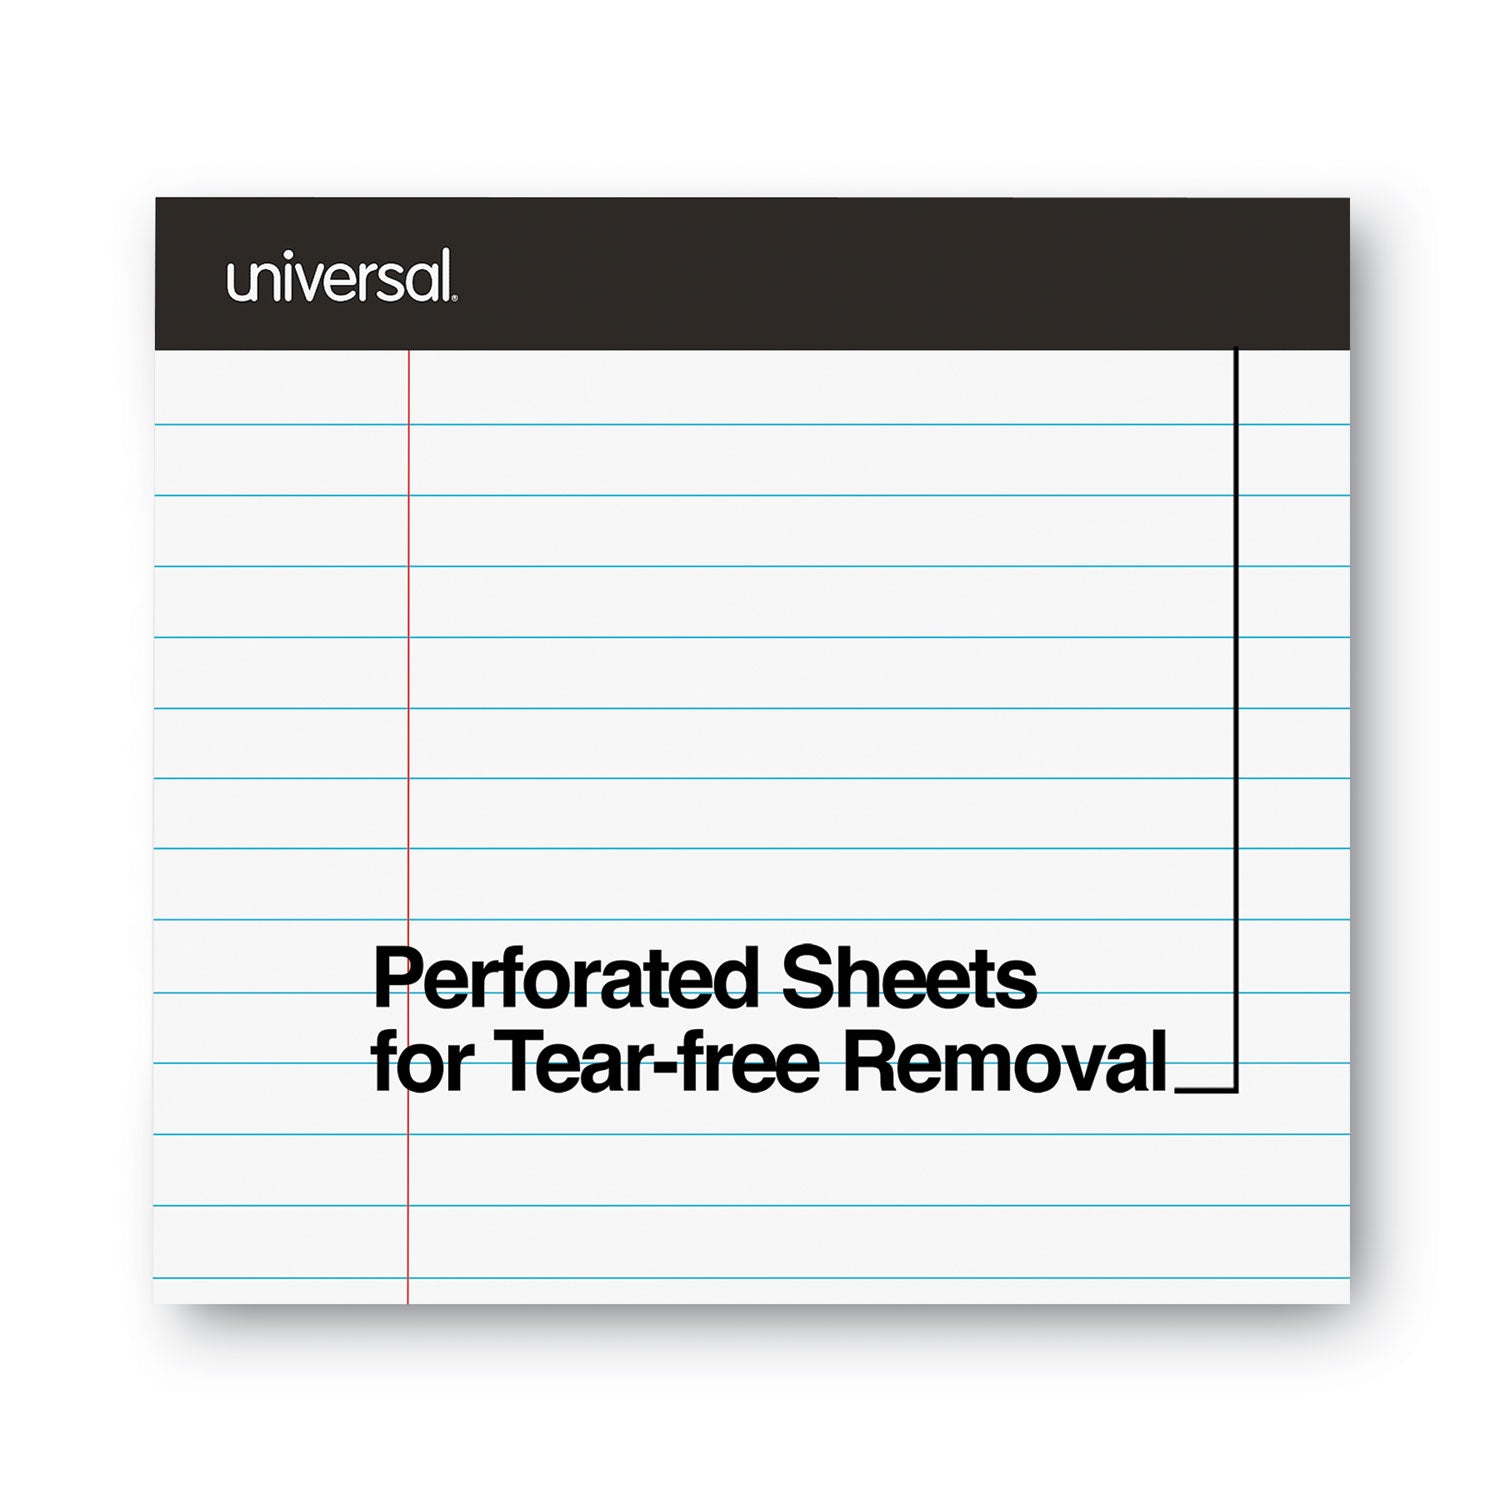 Premium Ruled Writing Pads with Heavy-Duty Back, Wide/Legal Rule, Black Headband, 50 White 8.5 x 11 Sheets, 12/Pack - 